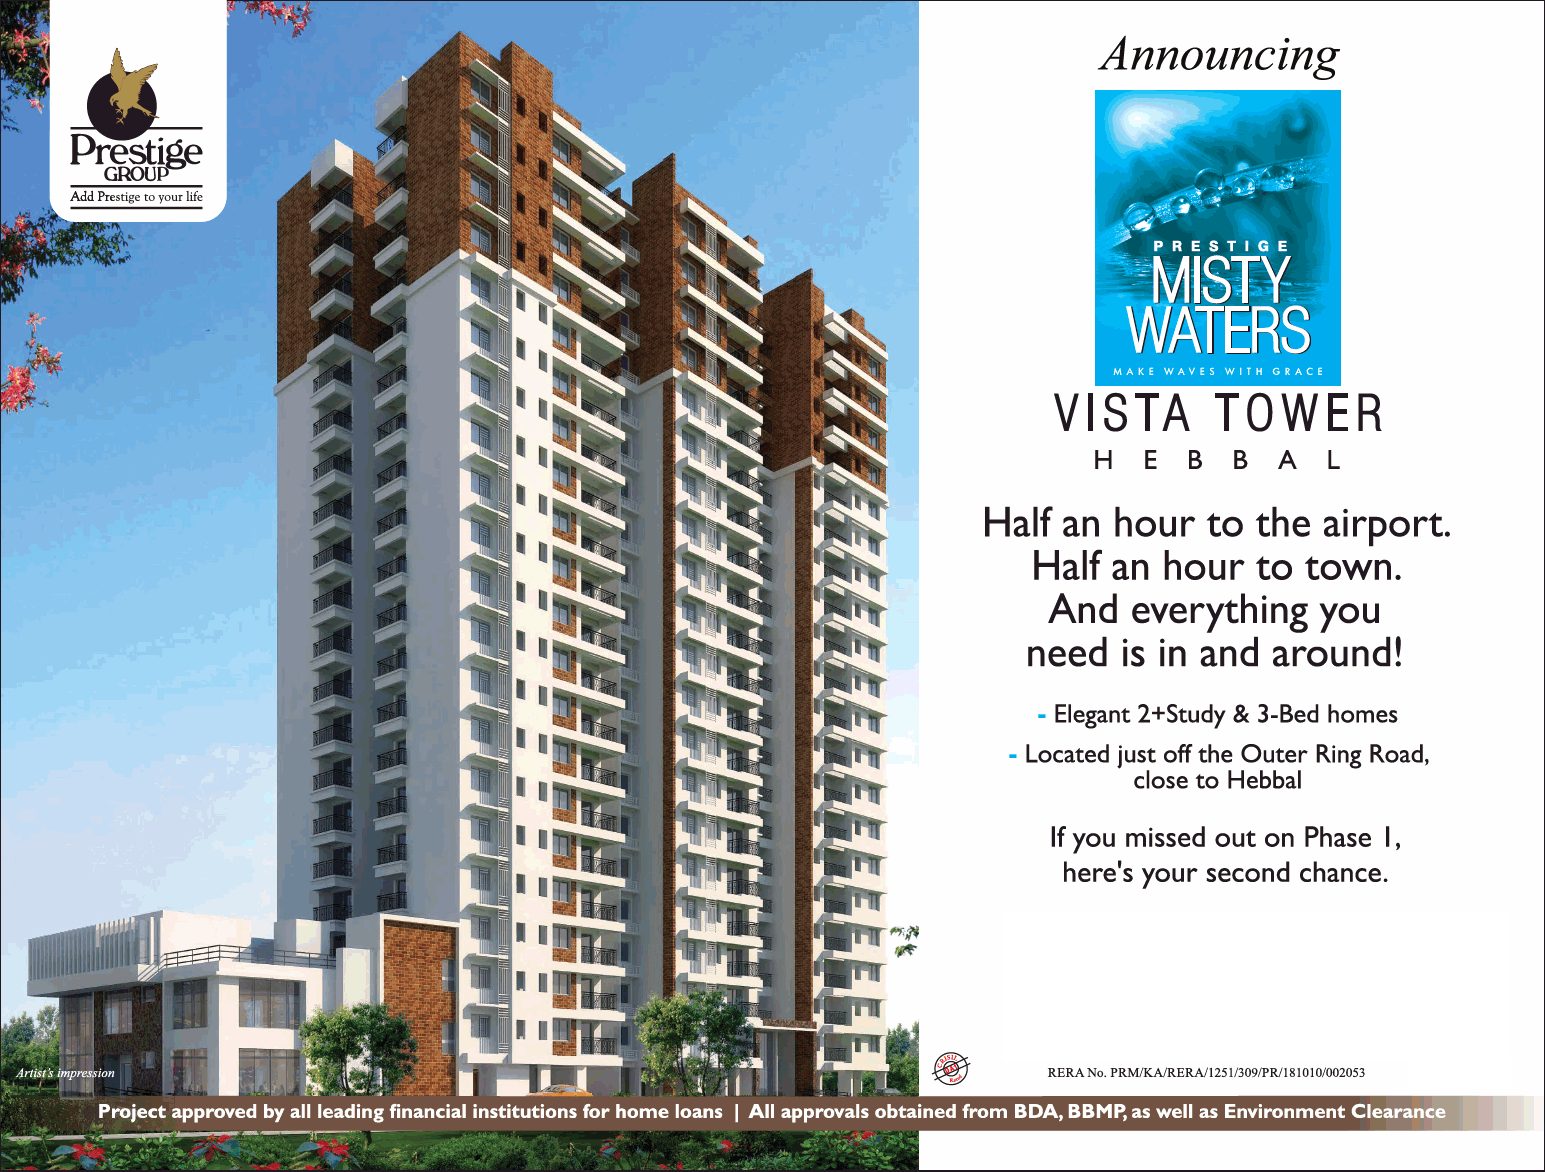 Launching elegant 2+study & 3-bed homes at Prestige Misty Waters in Bangalore Update